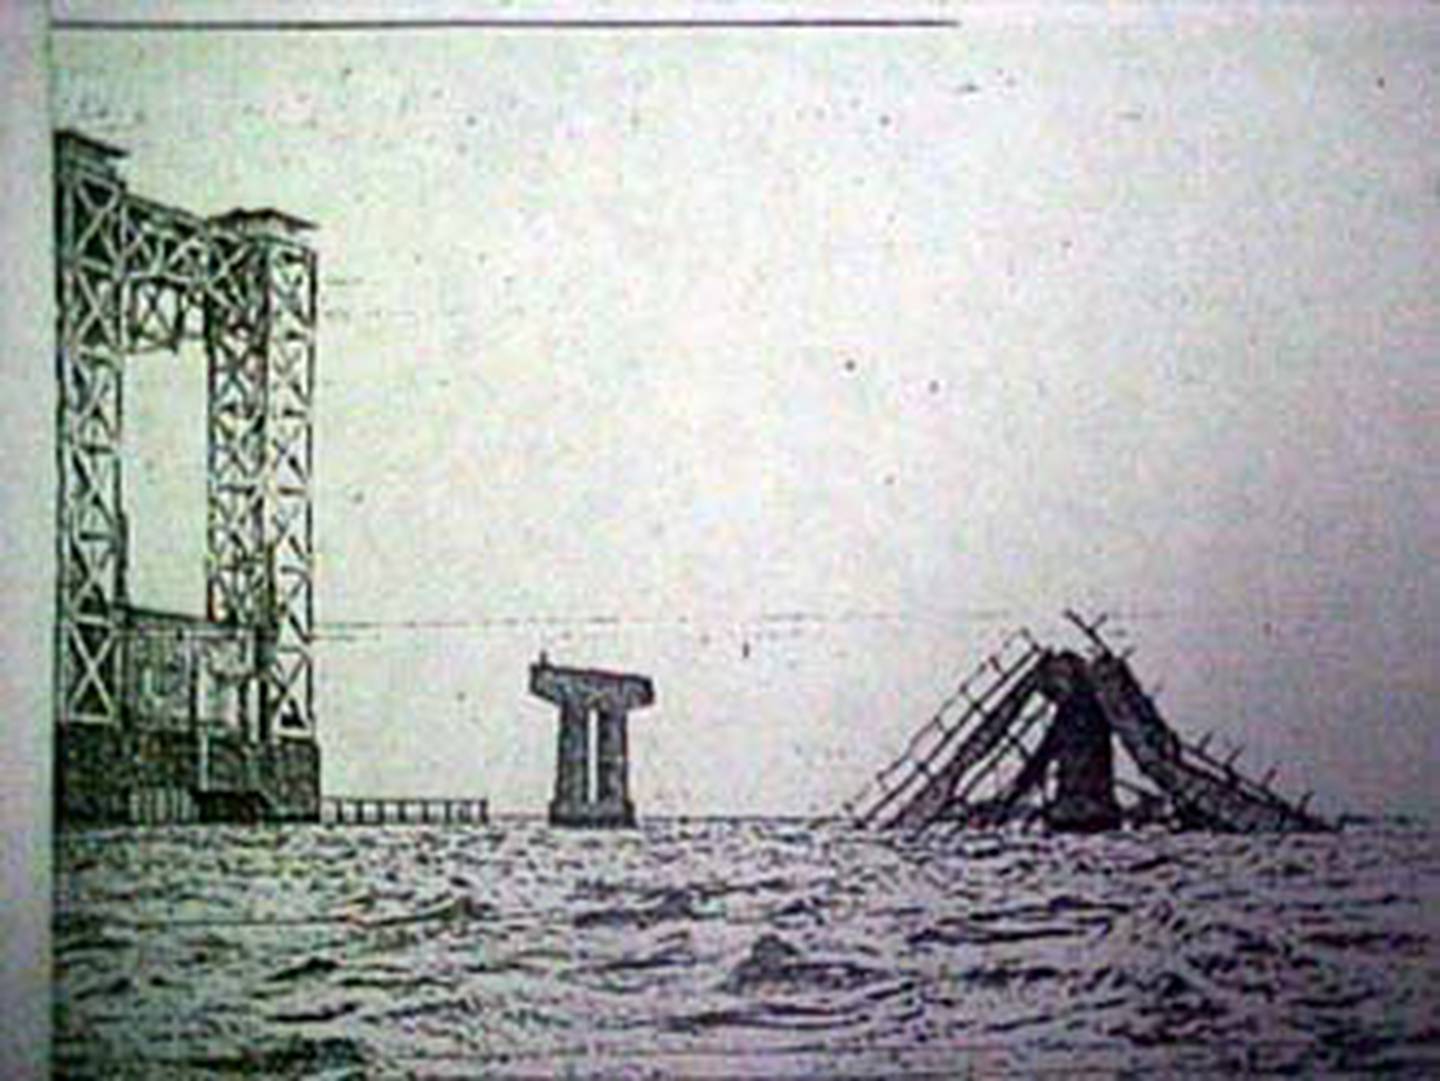 On Nov. 7, 1972, the Sidney Lanier Bridge was hit by a cargo ship named "African Neptune," causing cars to fall into the water, killing 10.